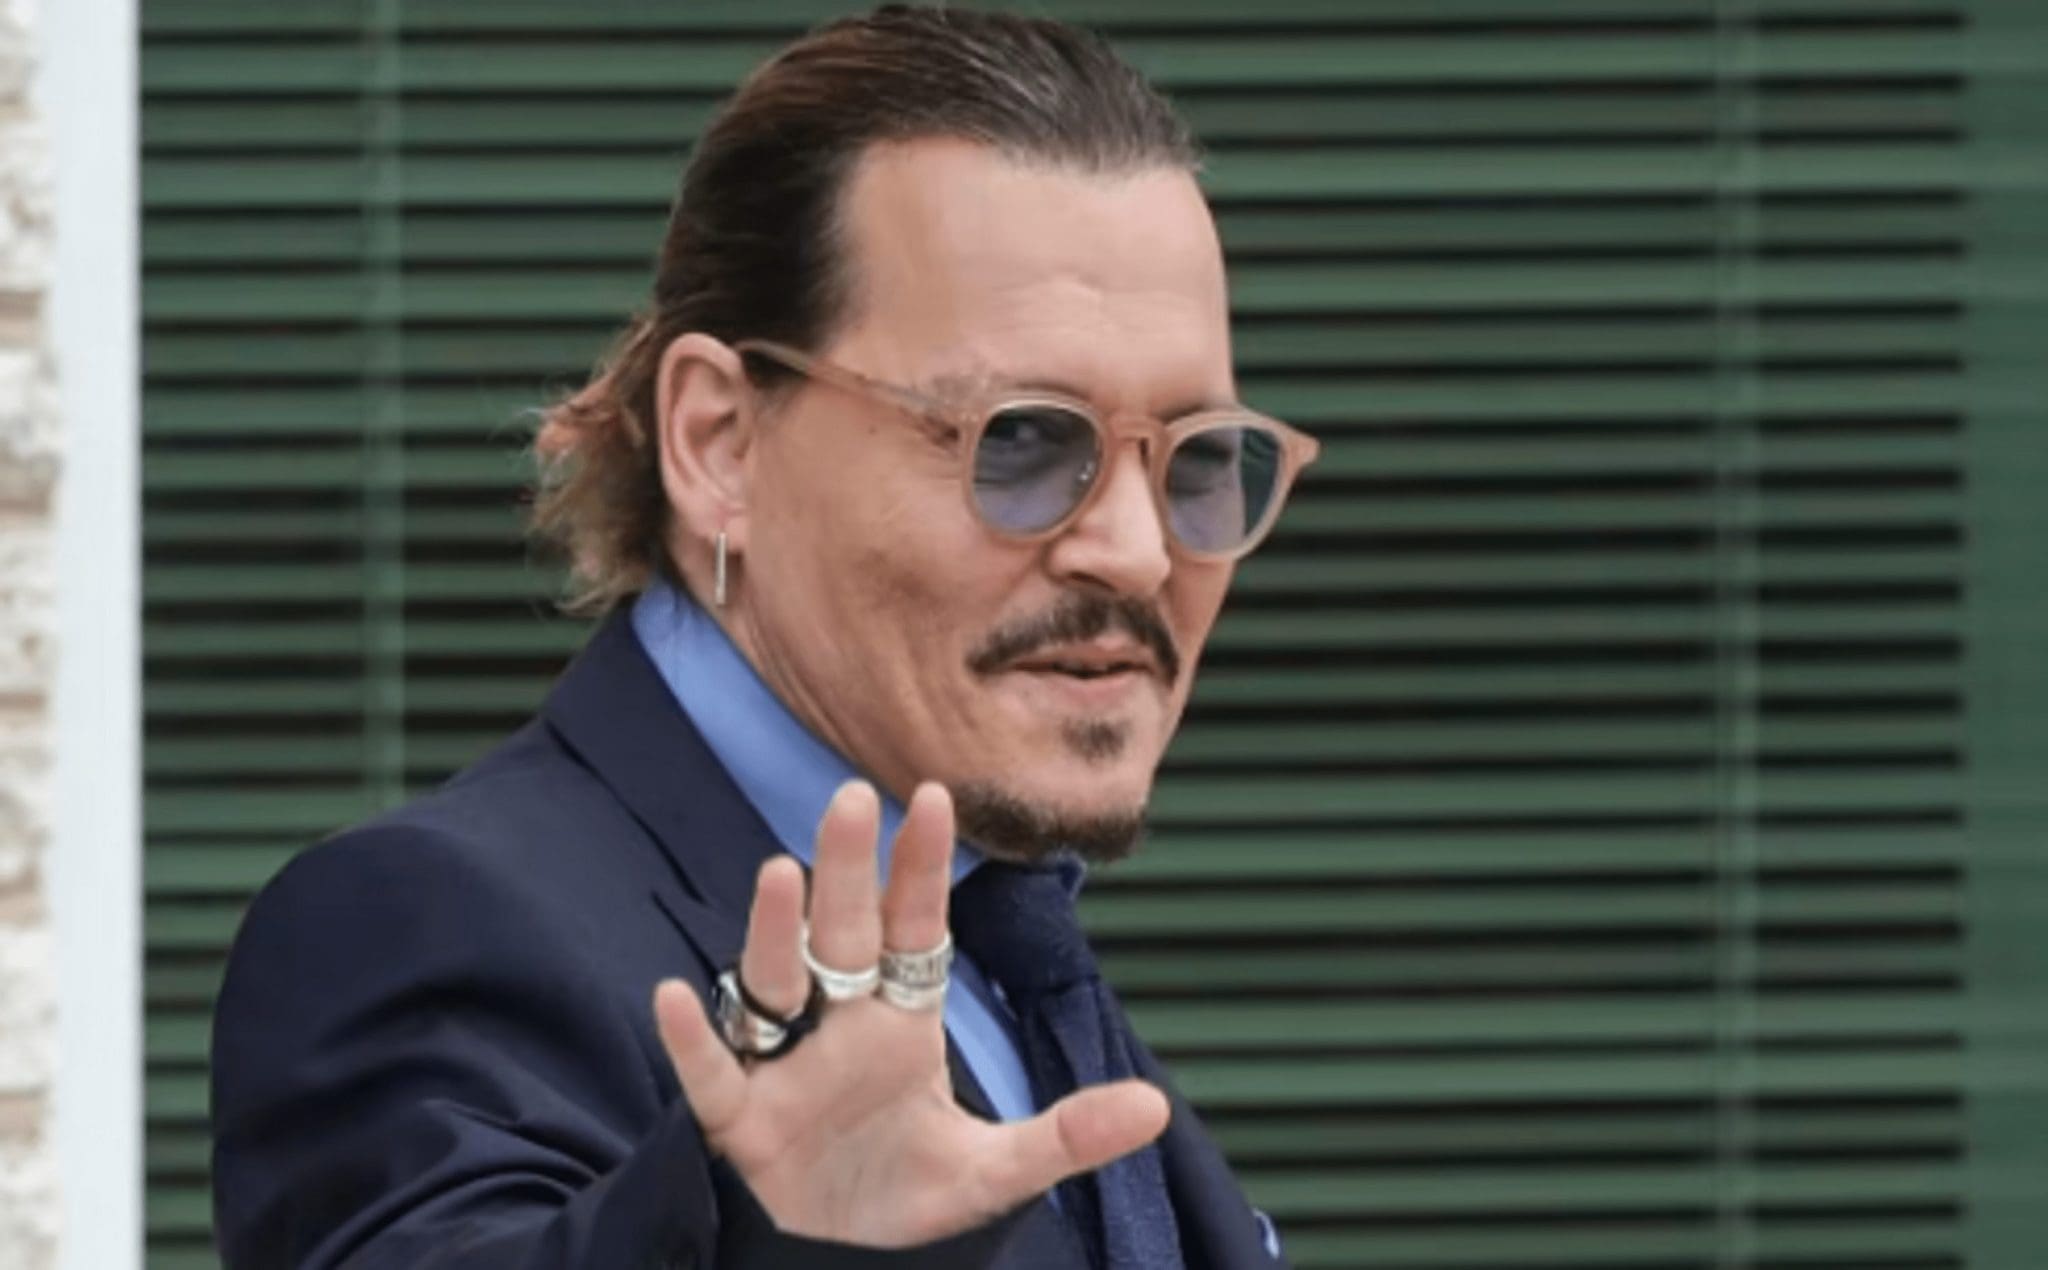 Johnny Depp warns his army of fans: 'Fake accounts are impersonating me'